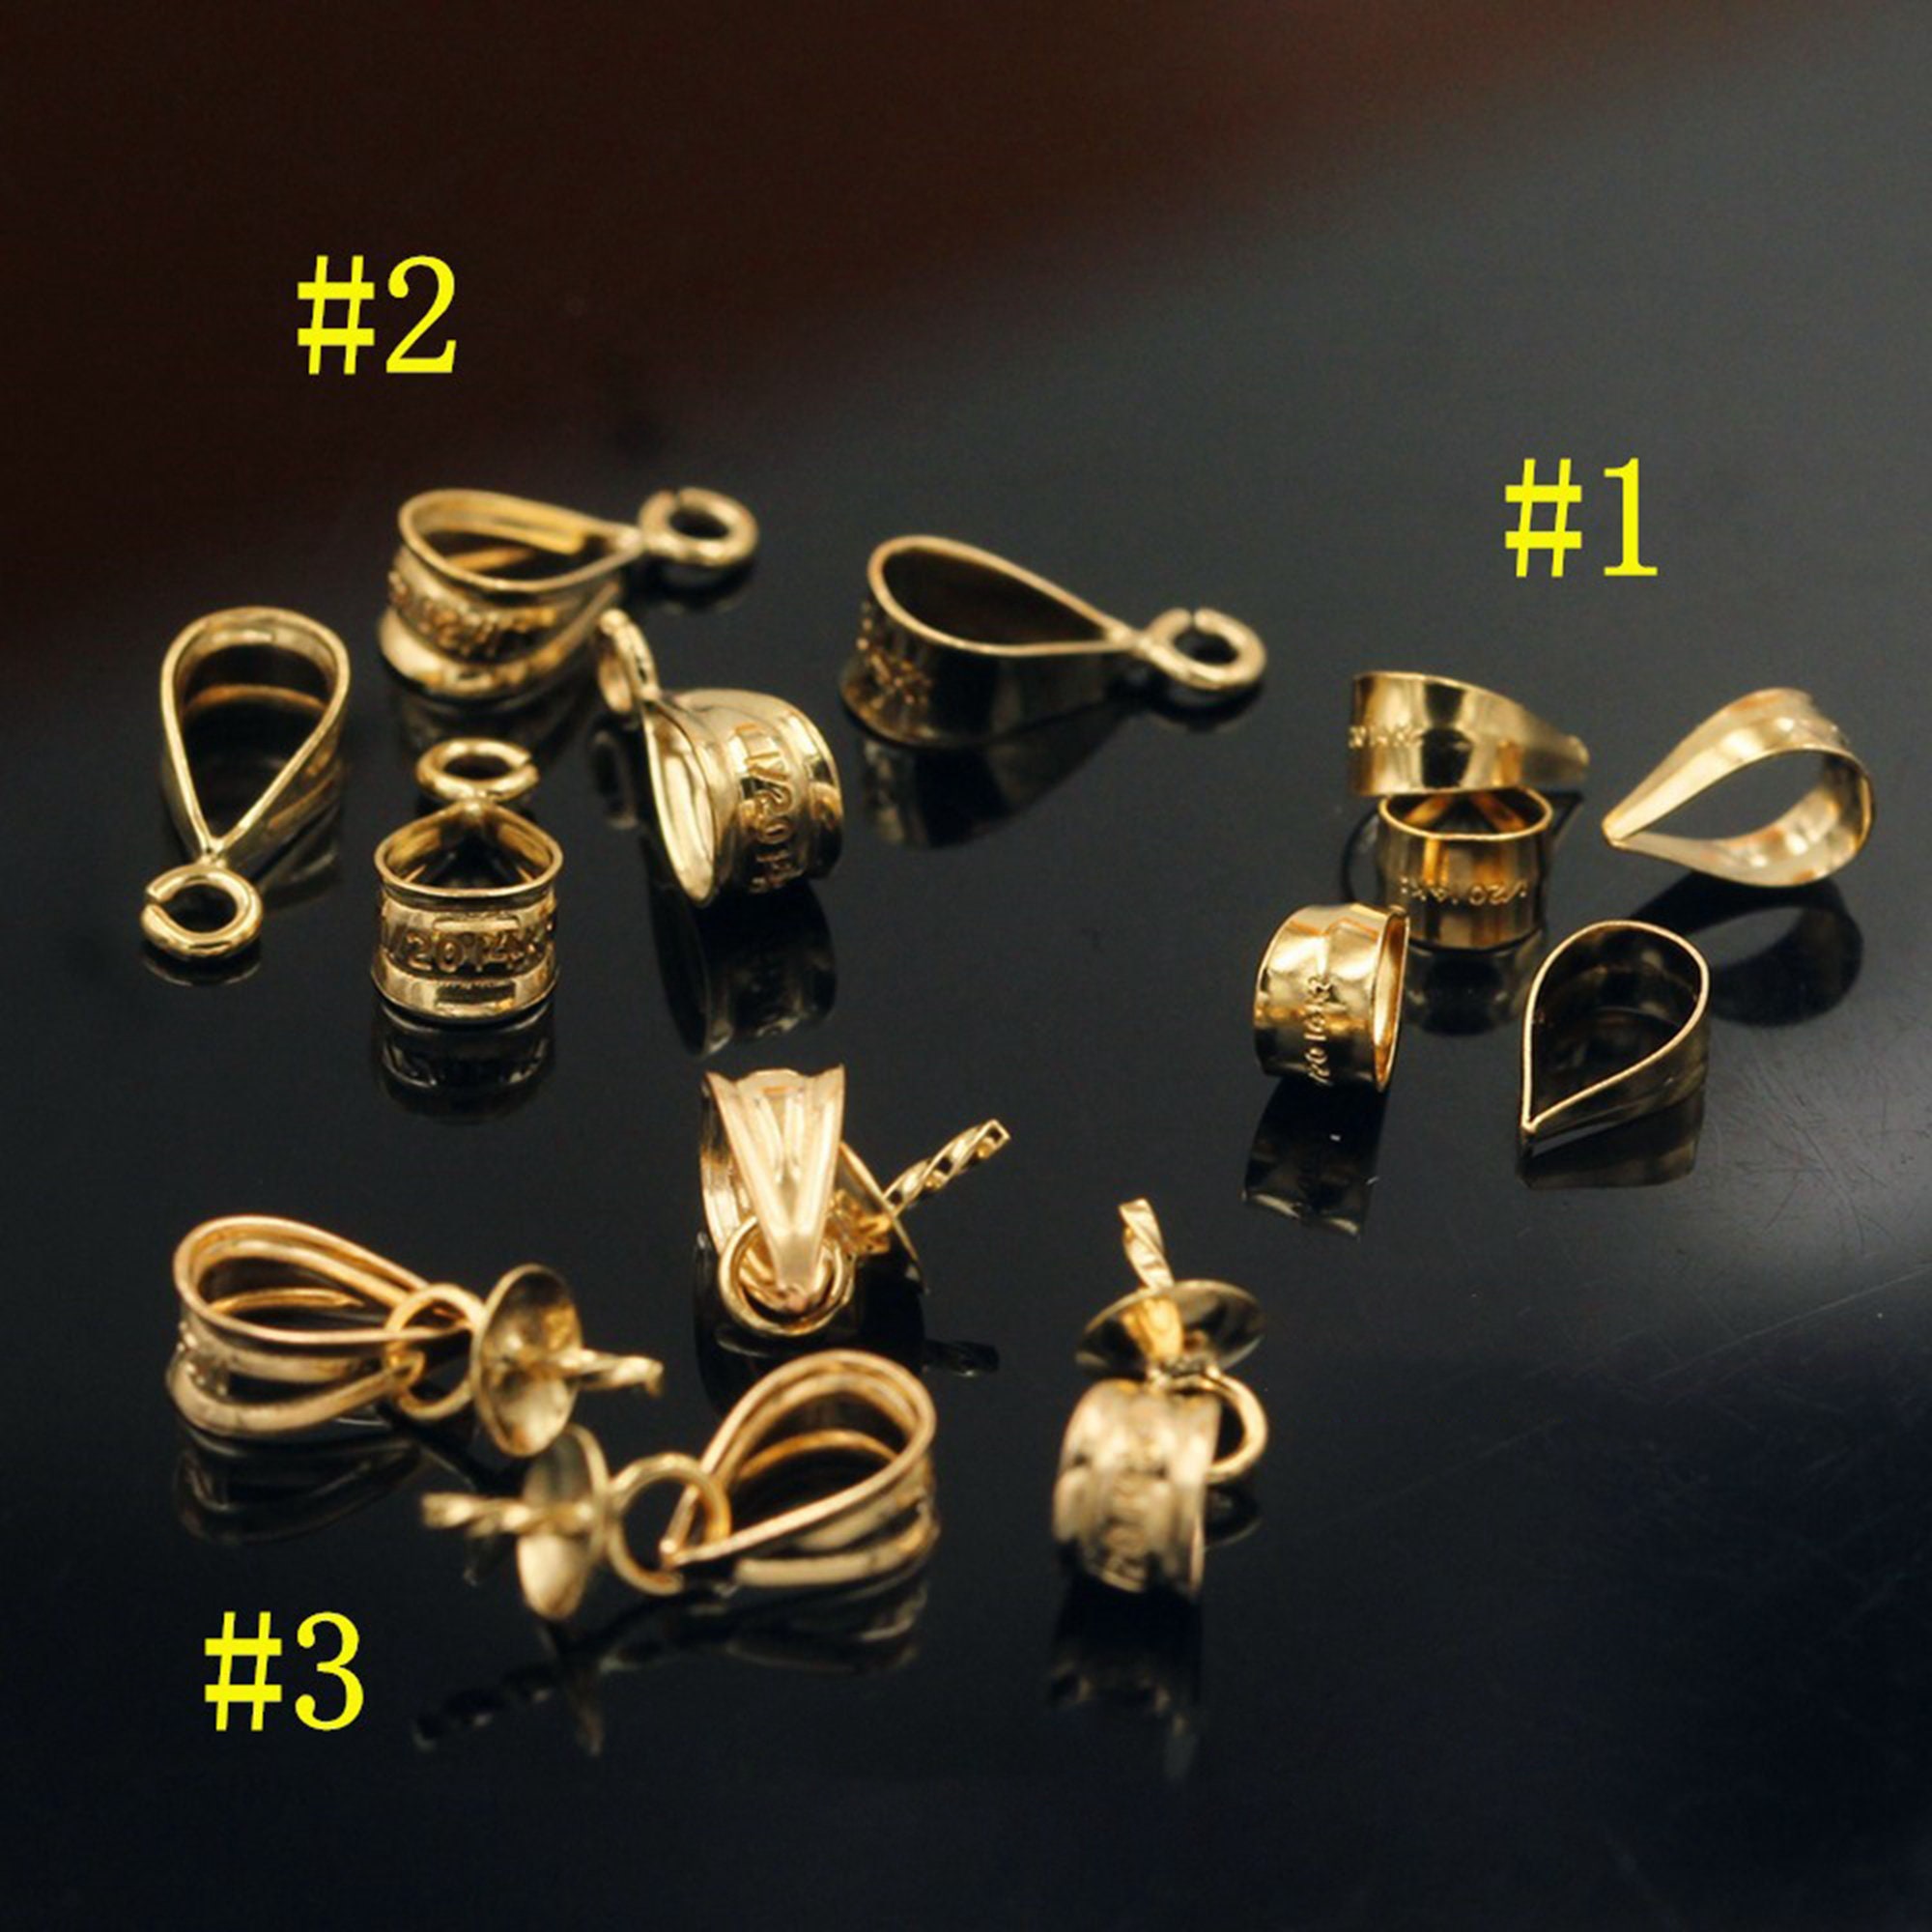 15x4mm Gold Plated Brass Swinging 2-Part Pinch Bails For Pendants x2 -  Bails - Jewelry Findings - Supplies & Tools